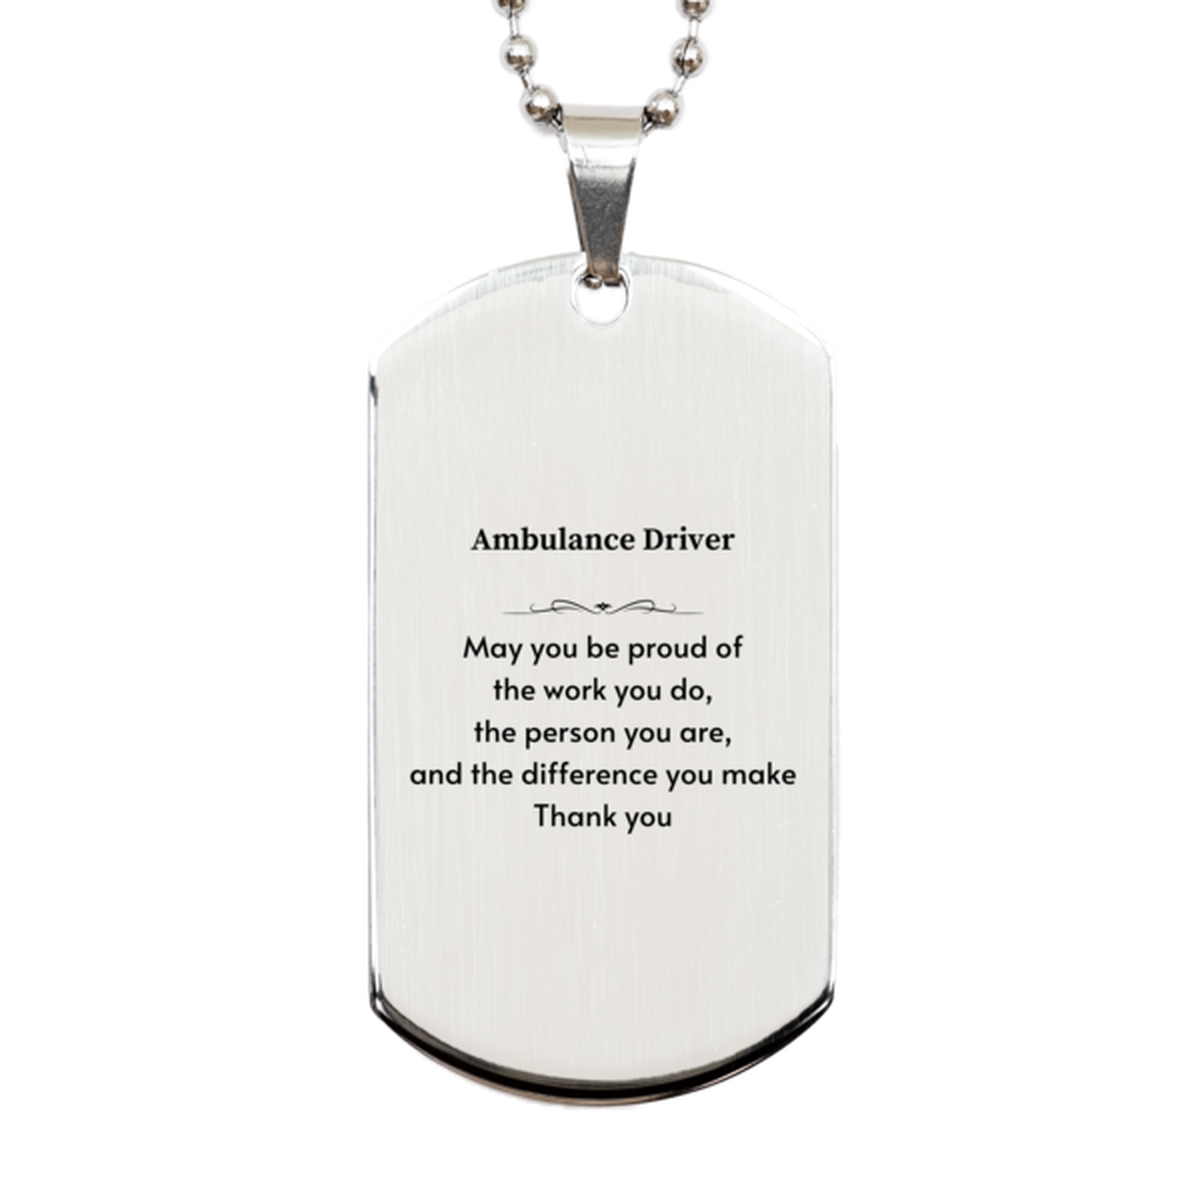 Heartwarming Silver Dog Tag Retirement Coworkers Gifts for Ambulance Driver, Ambulance Driver May You be proud of the work you do, the person you are Gifts for Boss Men Women Friends